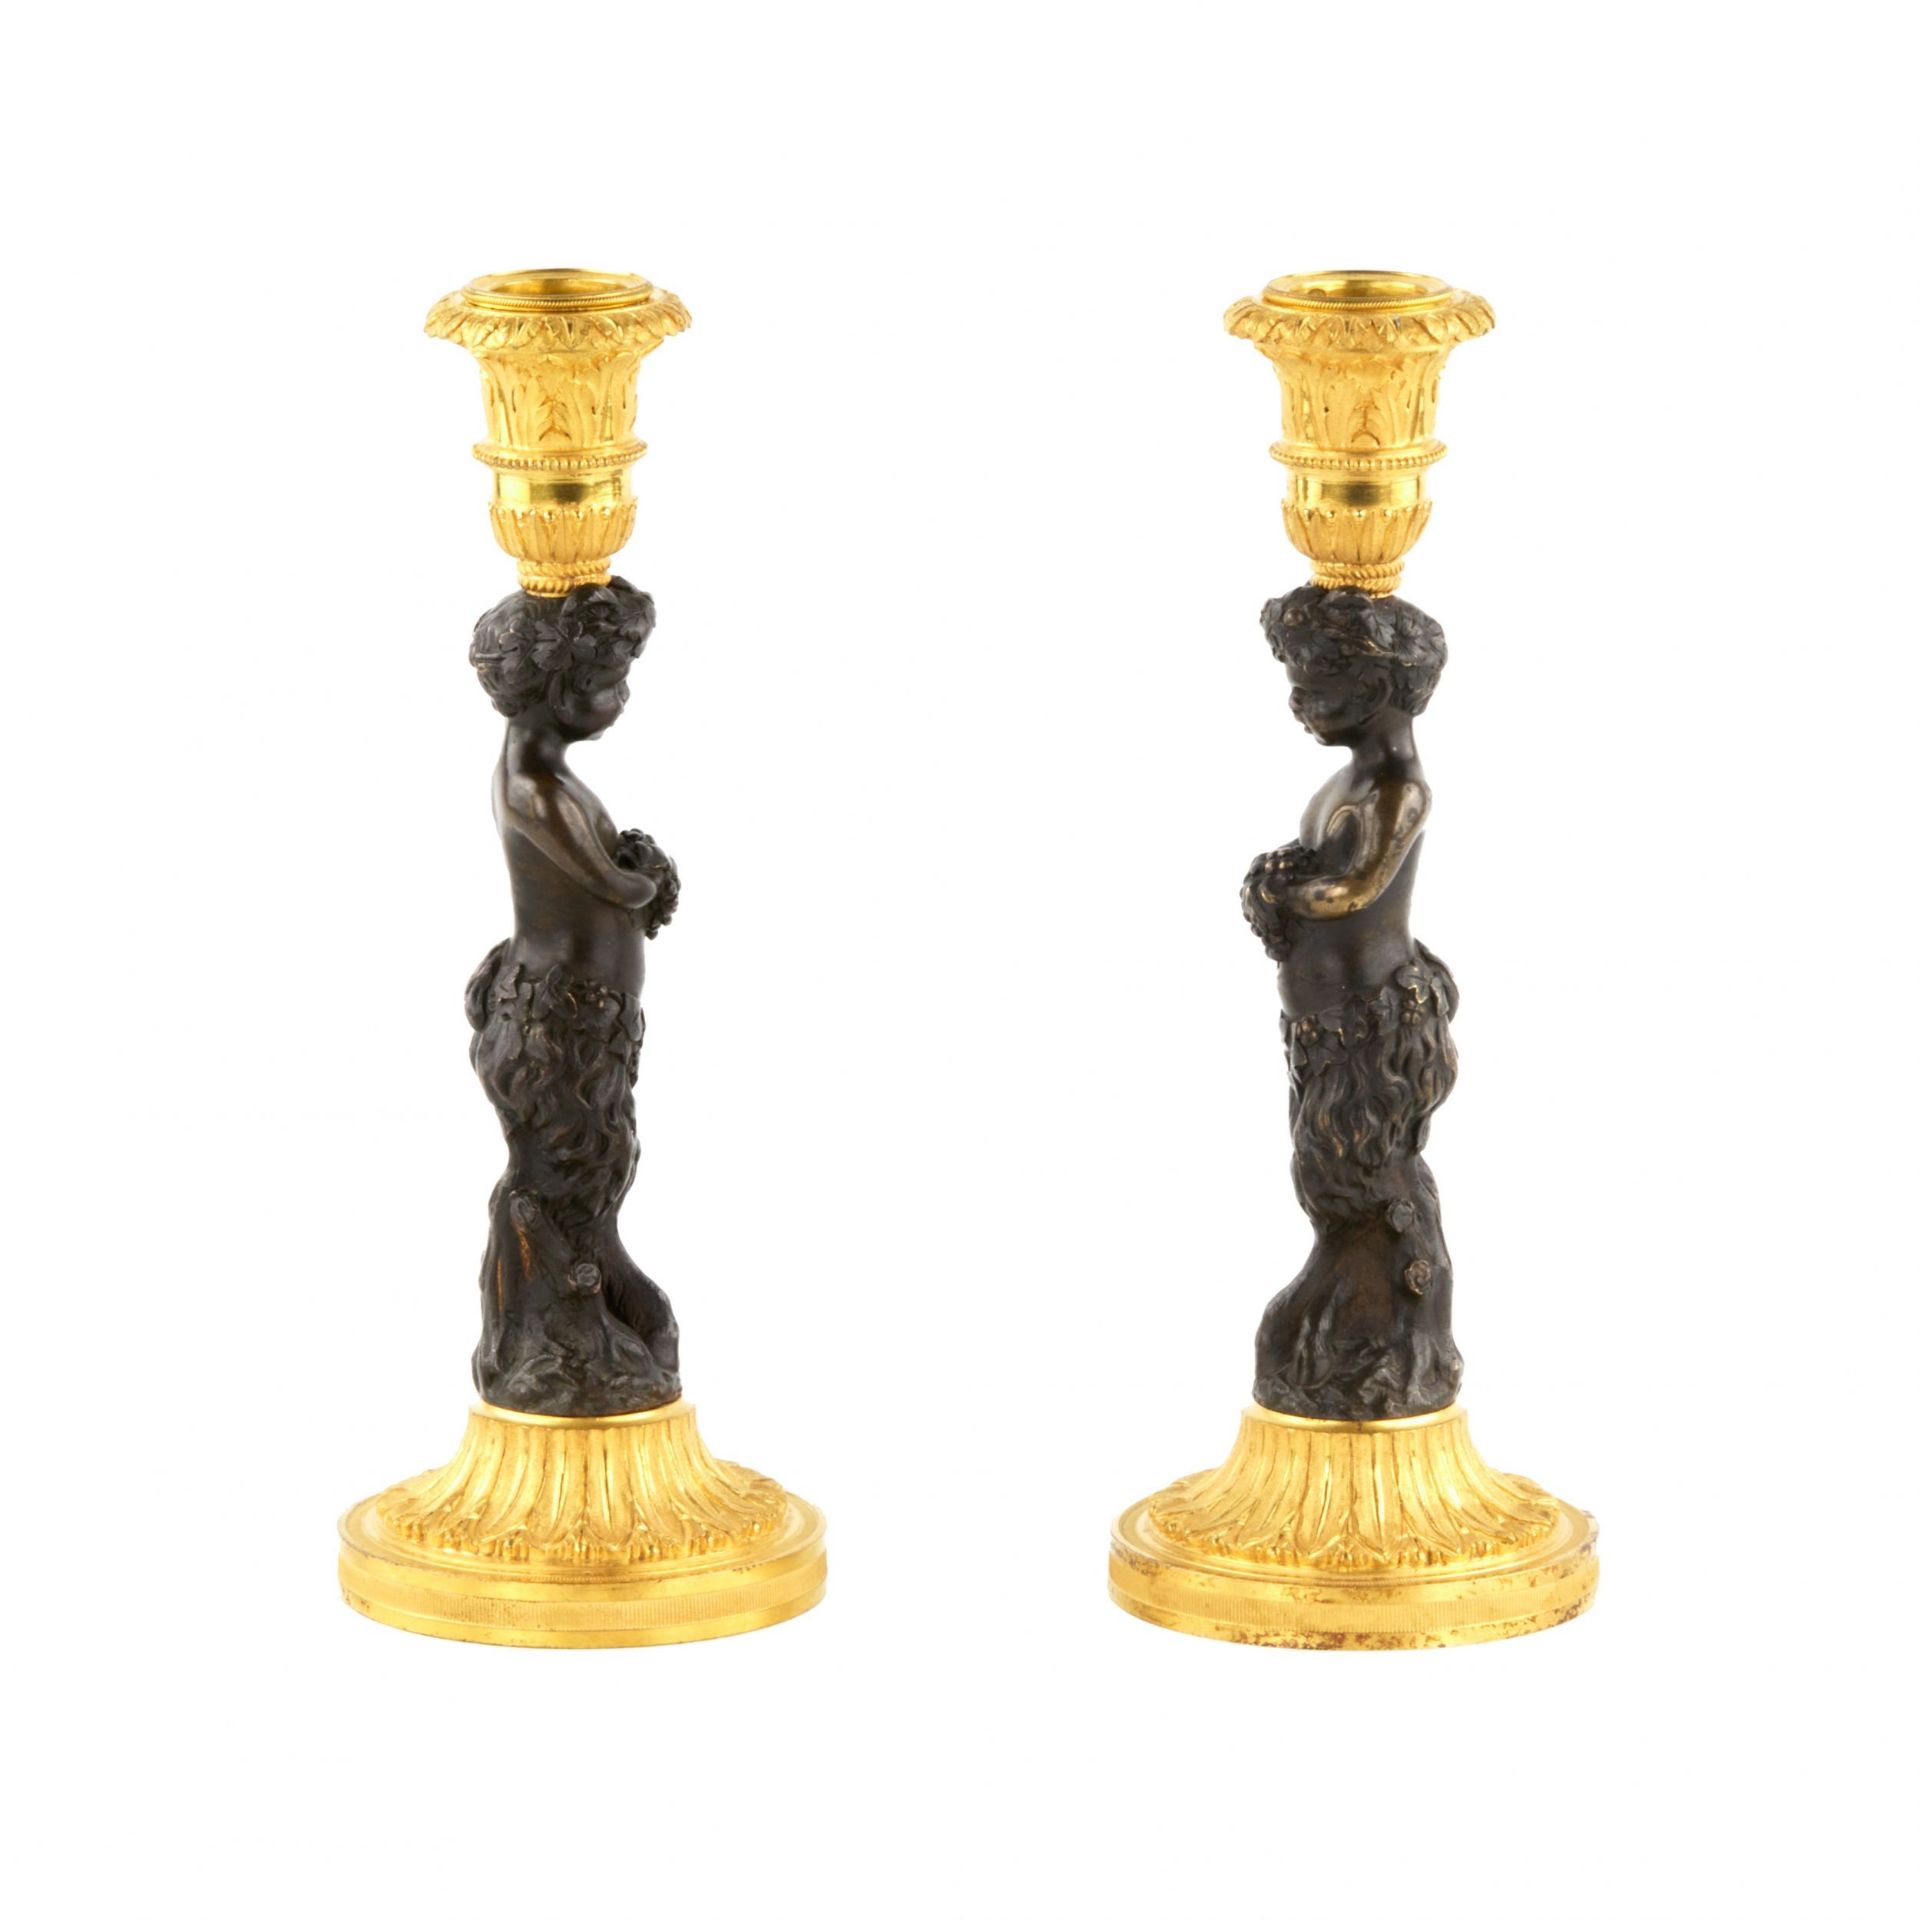 Pair of bronze, French candlesticks, in the form of fauns, mid-19th century. - Image 2 of 4